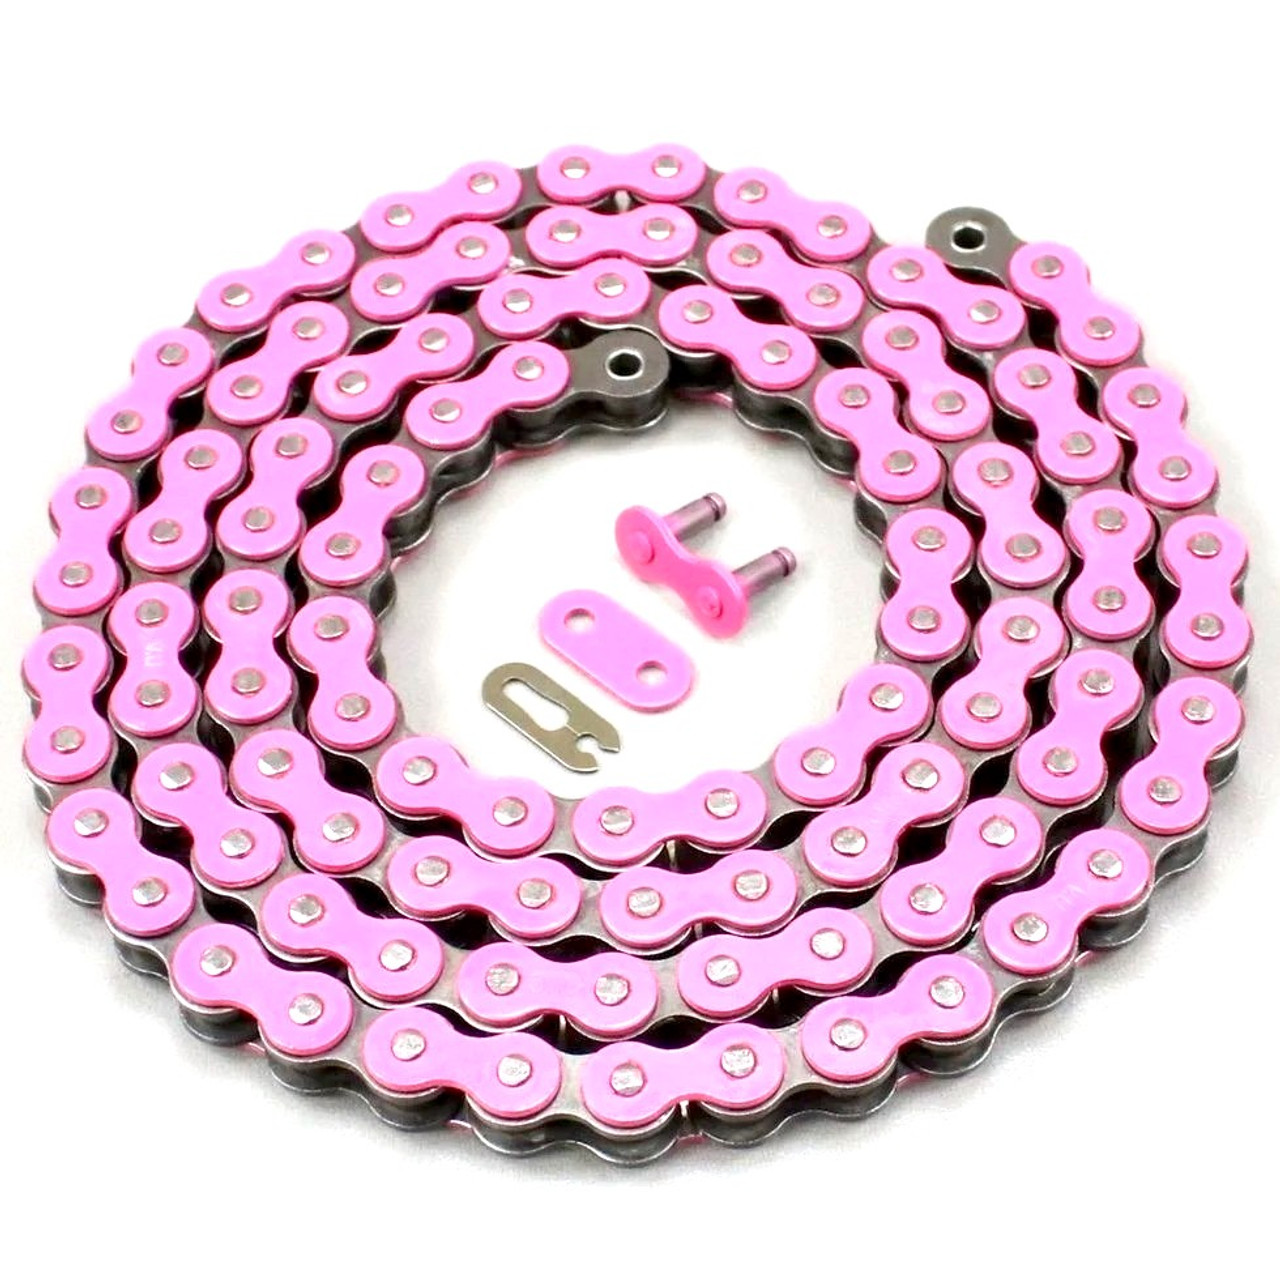 KMC 415 HD x 106 Link Moped Drive Chain - PINK